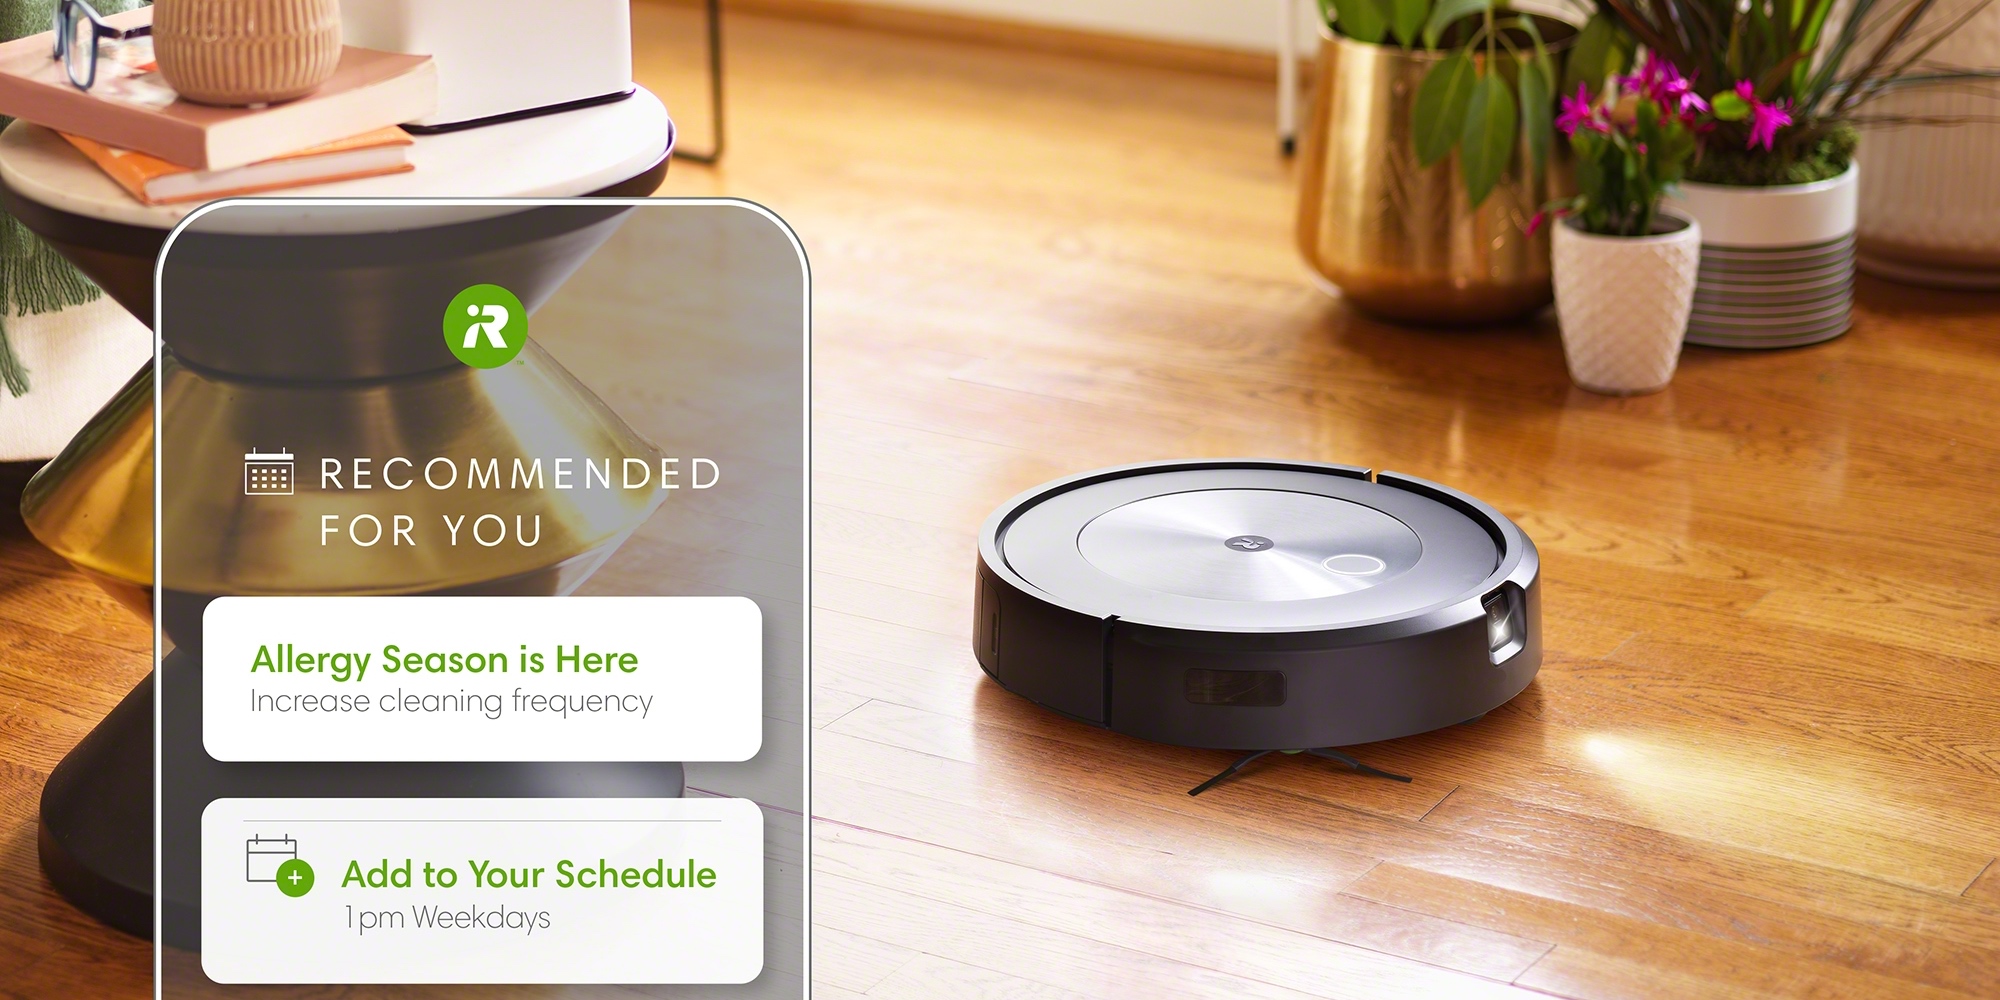 reemplazar detergente puerta Siri can now control your Roomba robot vacuum with new software update -  9to5Mac